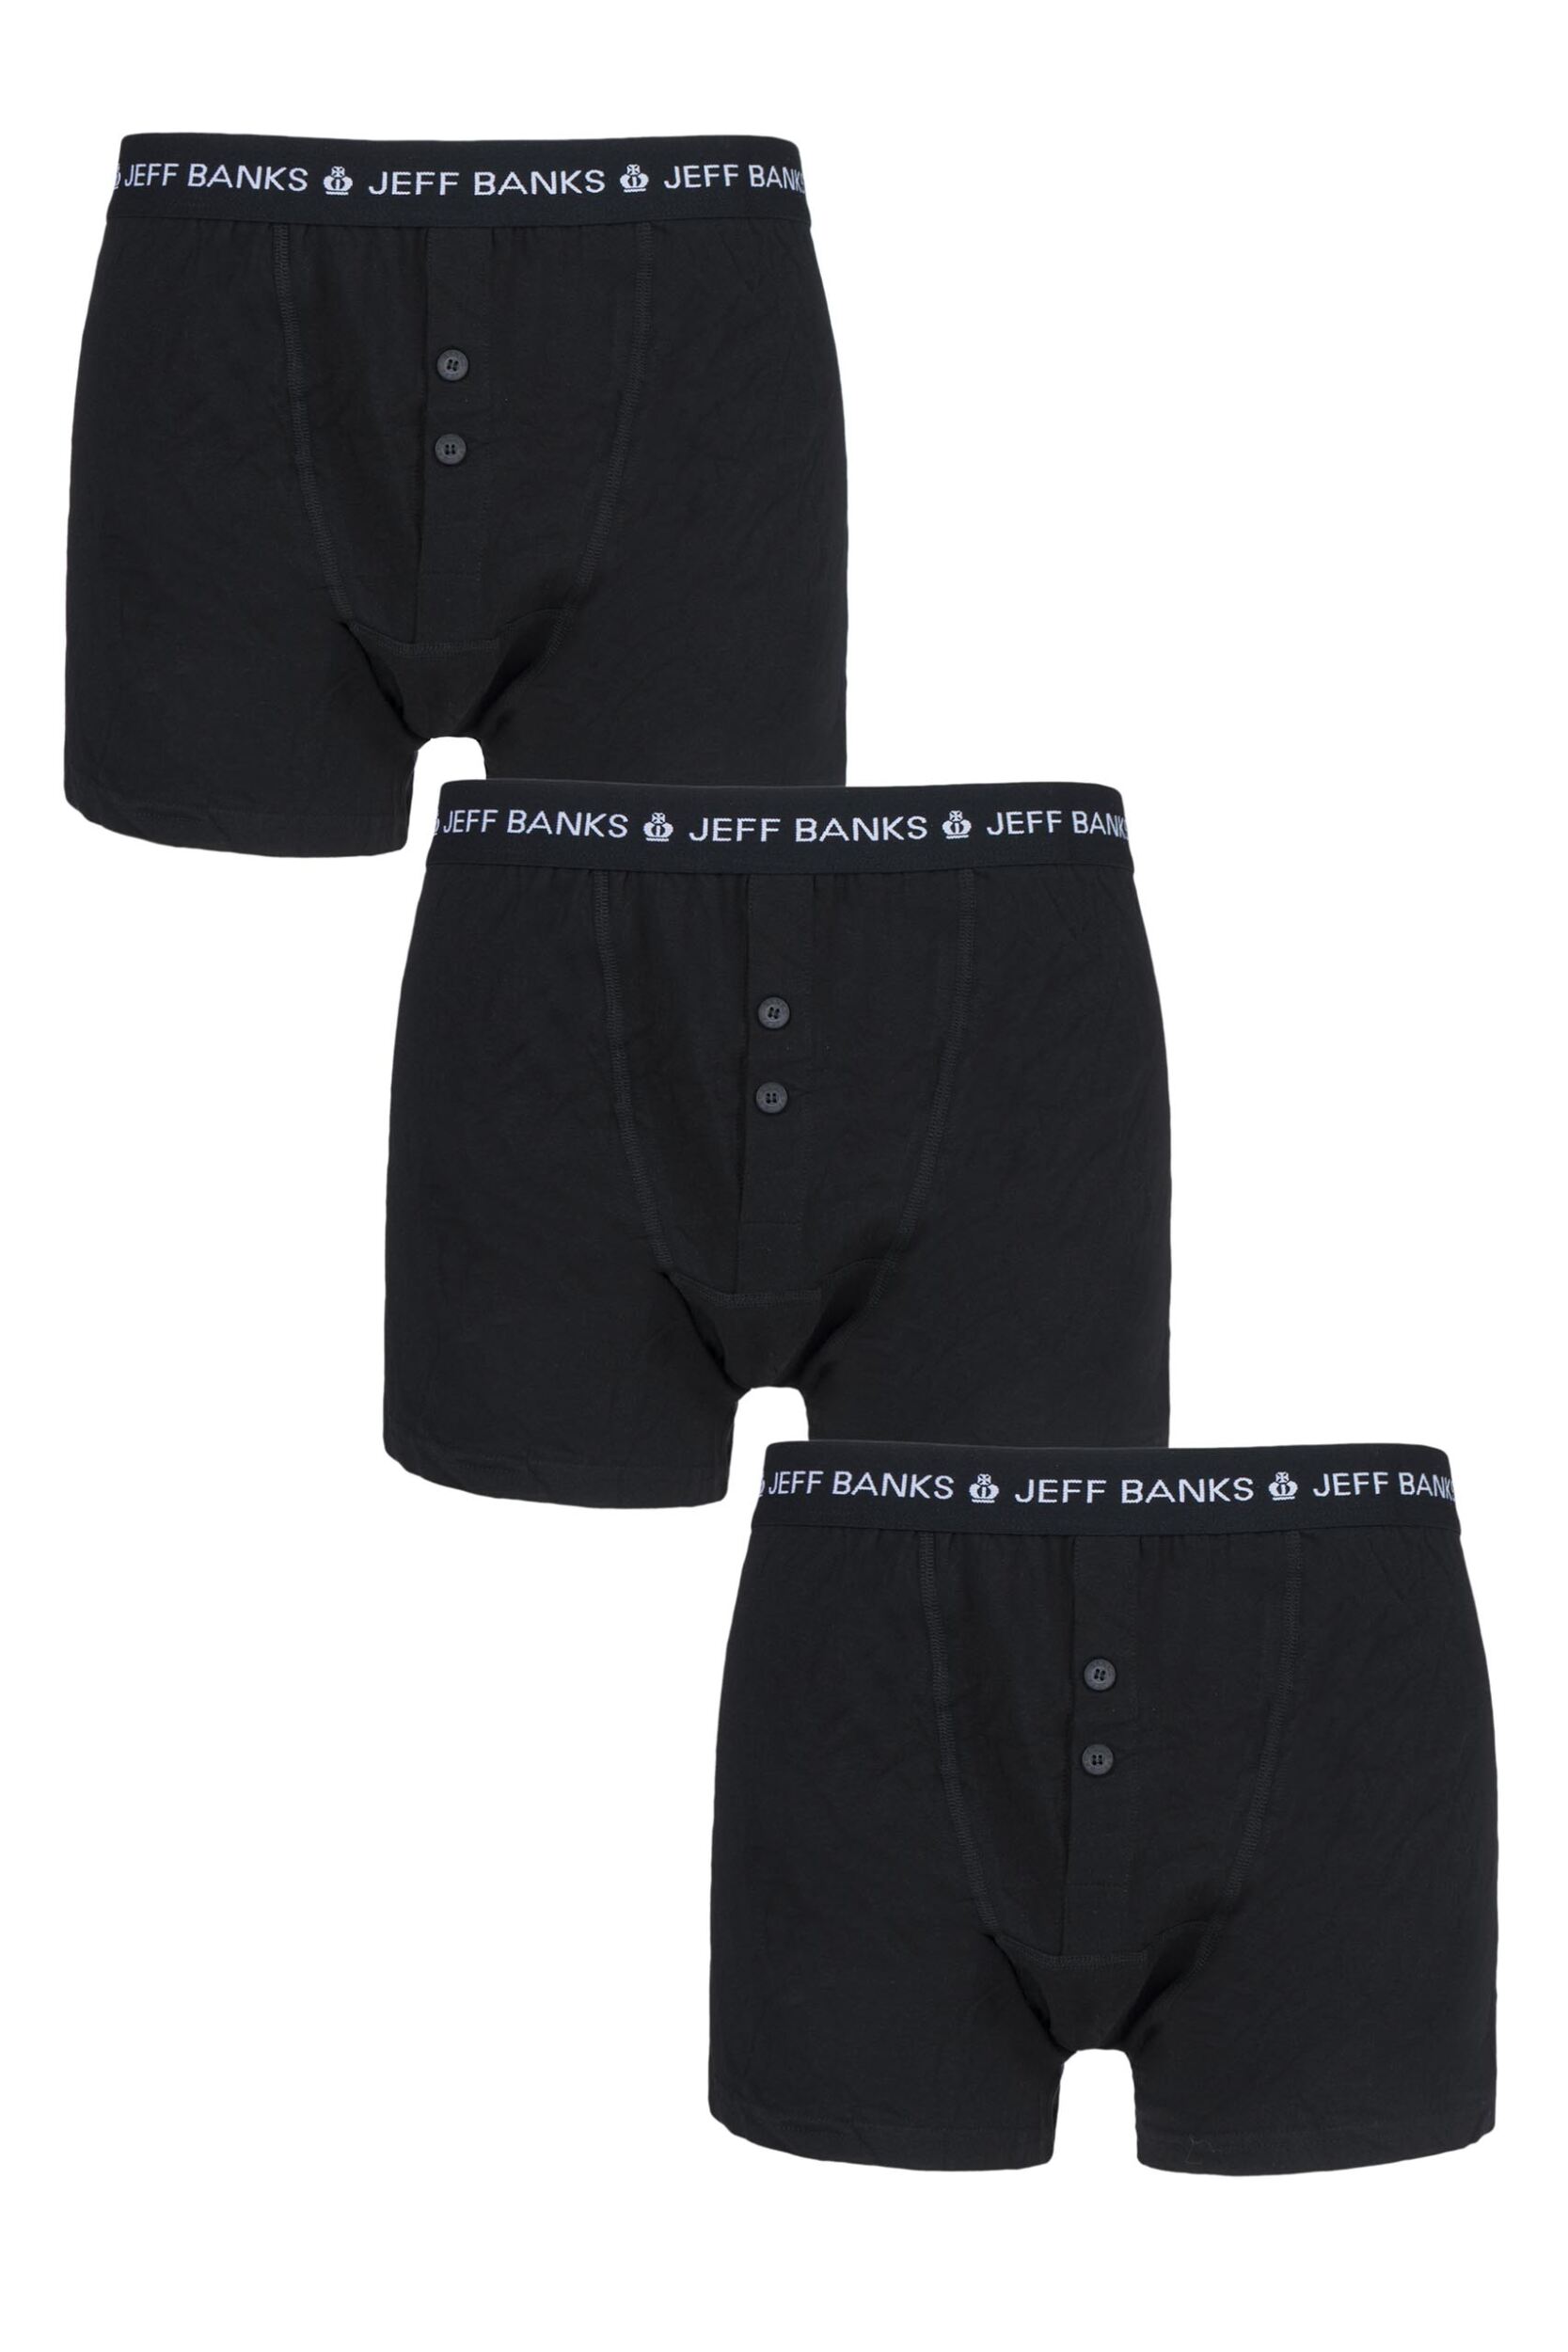 3 Pack Black Marlow Buttoned Boxer Shorts Men's Small - Jeff Banks